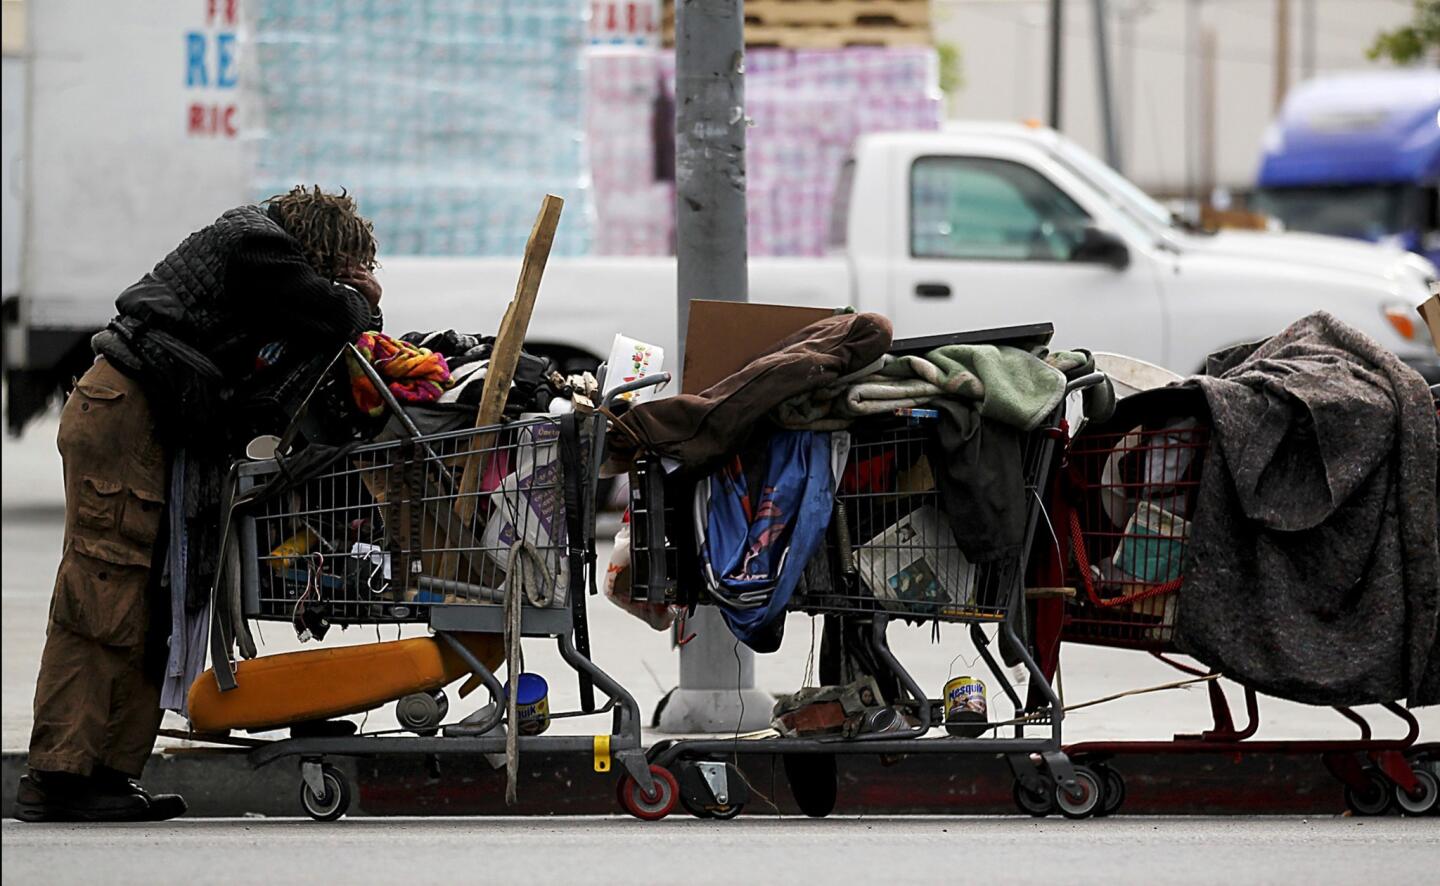 A man pulling a line of shopping carts pauses along 9th Street in downtown Los Angeles.